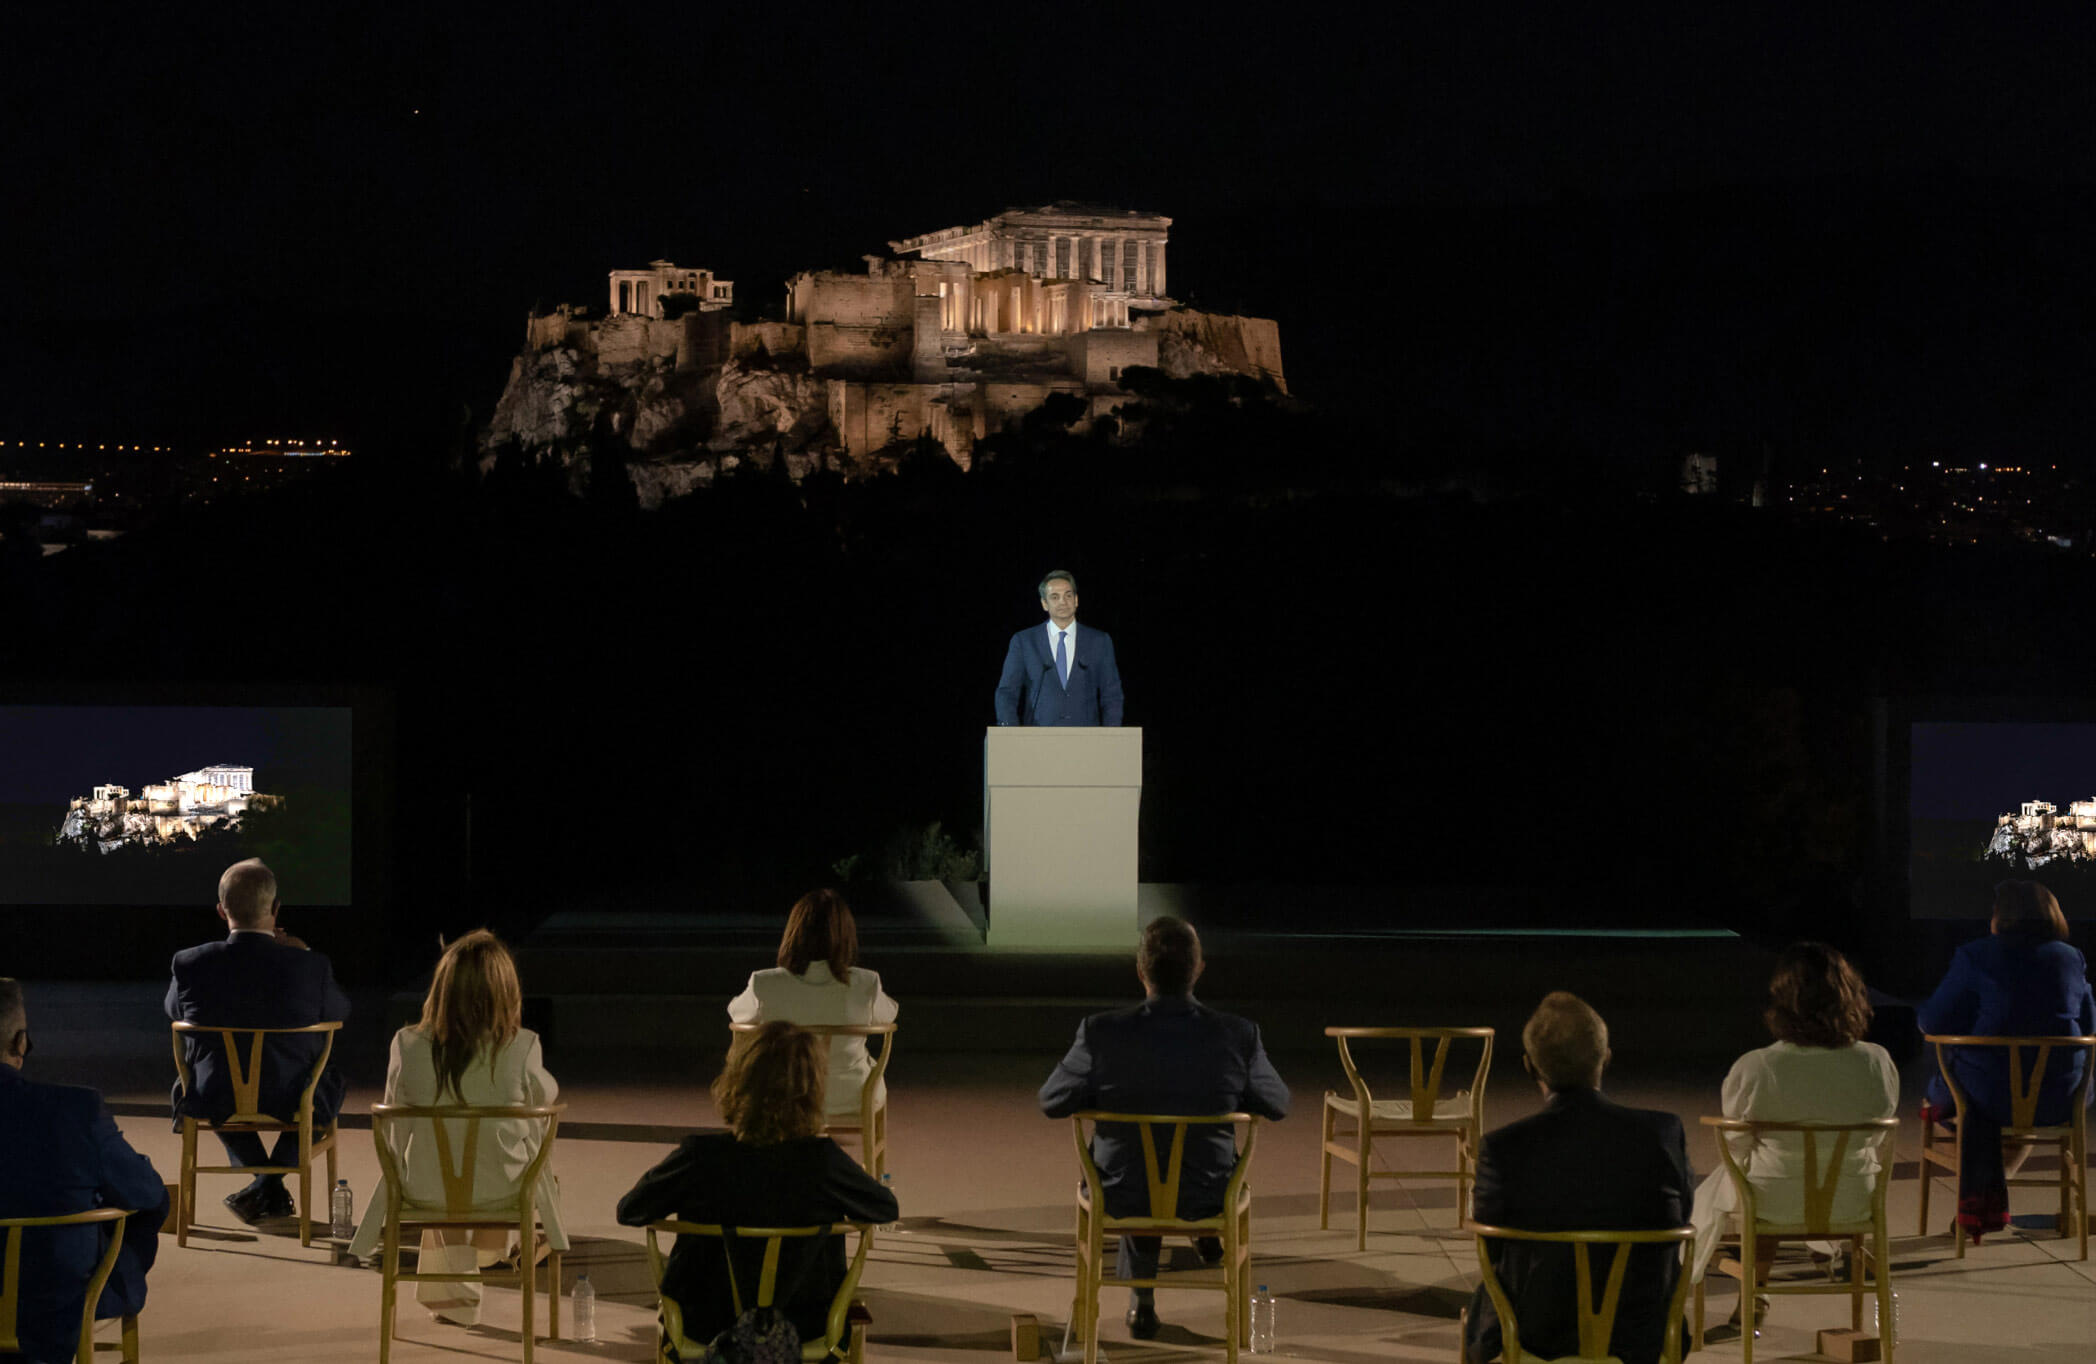 YARD-presentation_of_the_%ce%bdew_lighting_of_the_acropolis_of_athens_4